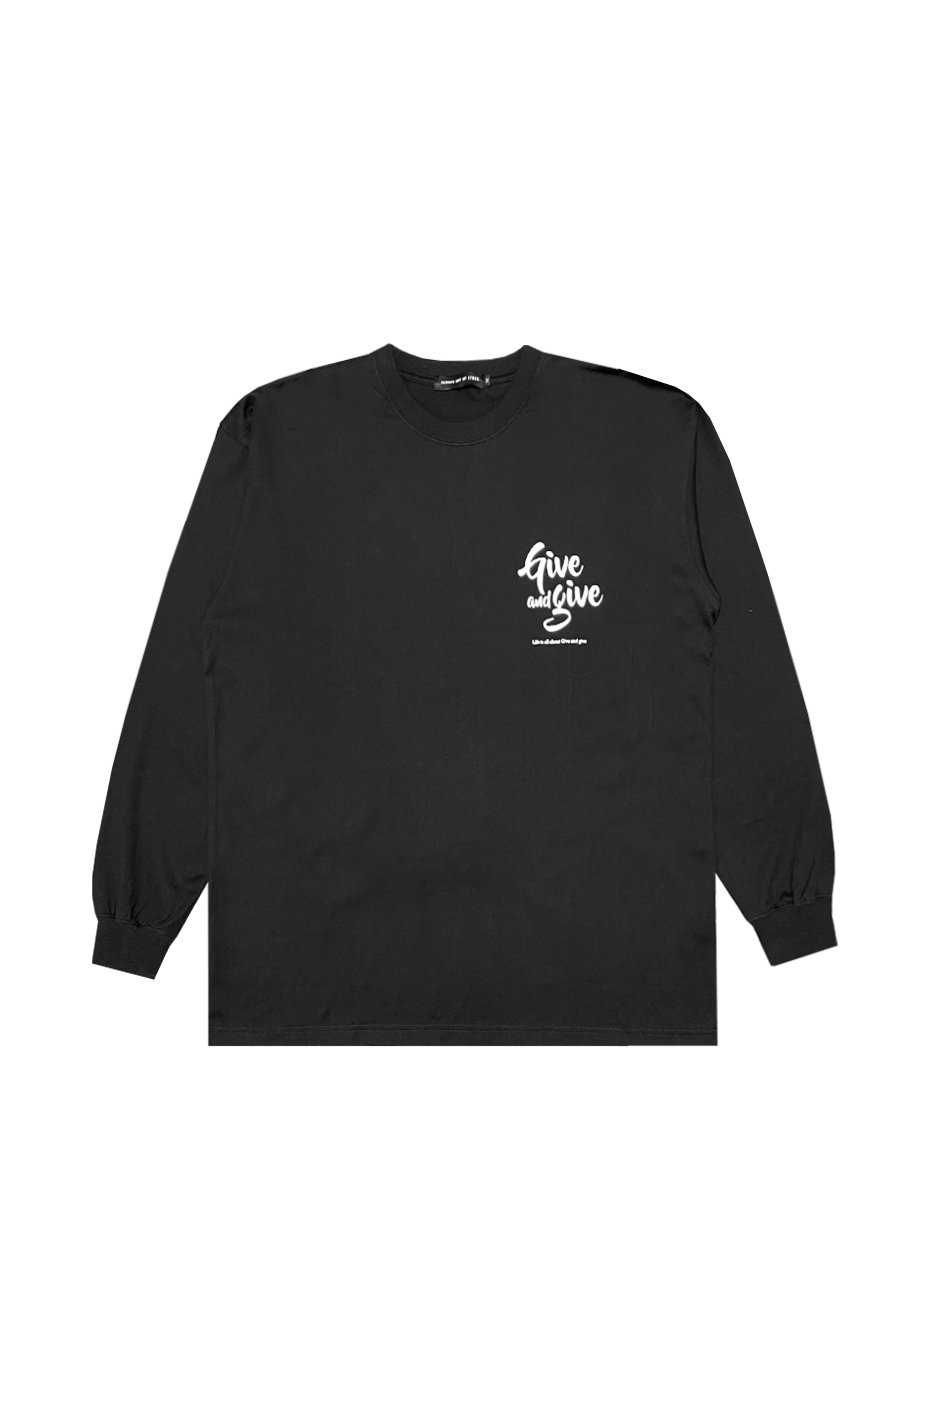 Give&give L/S TEE